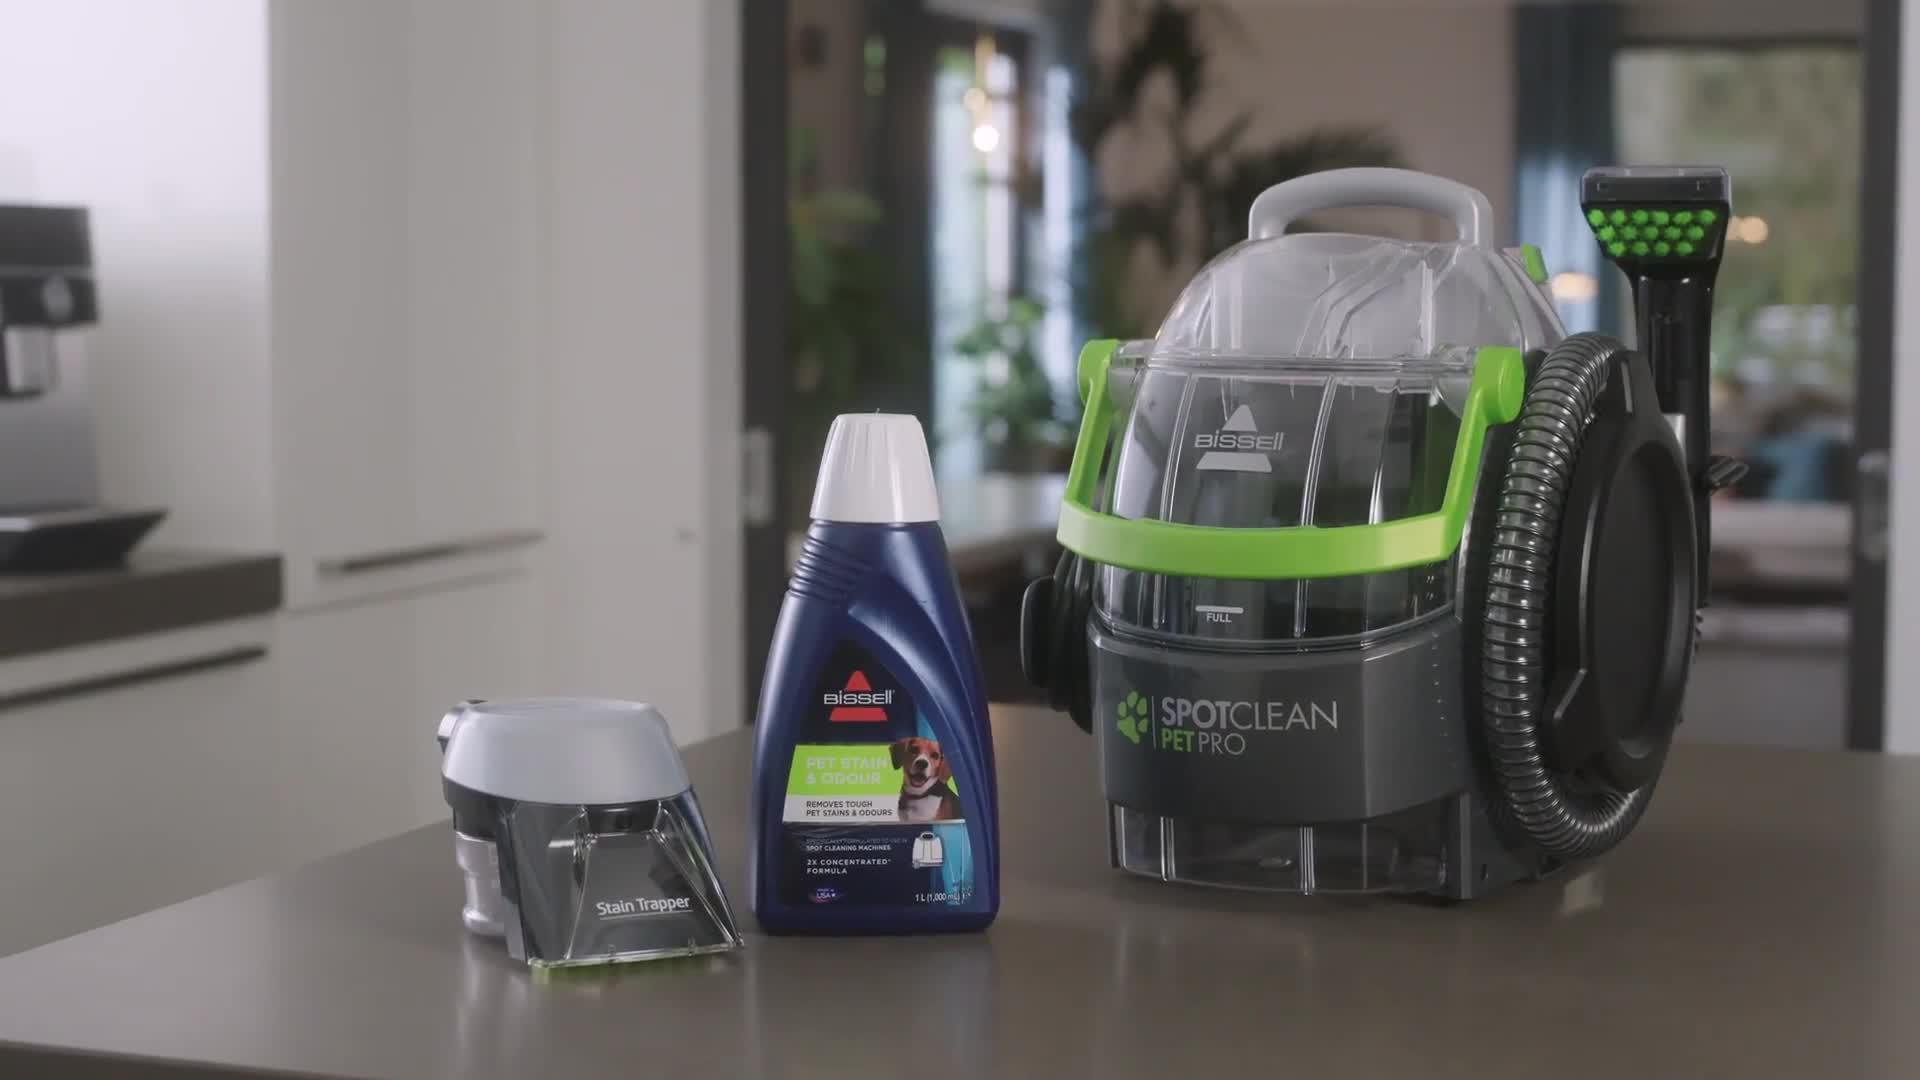 BISSELL SpotClean Pet Pro review